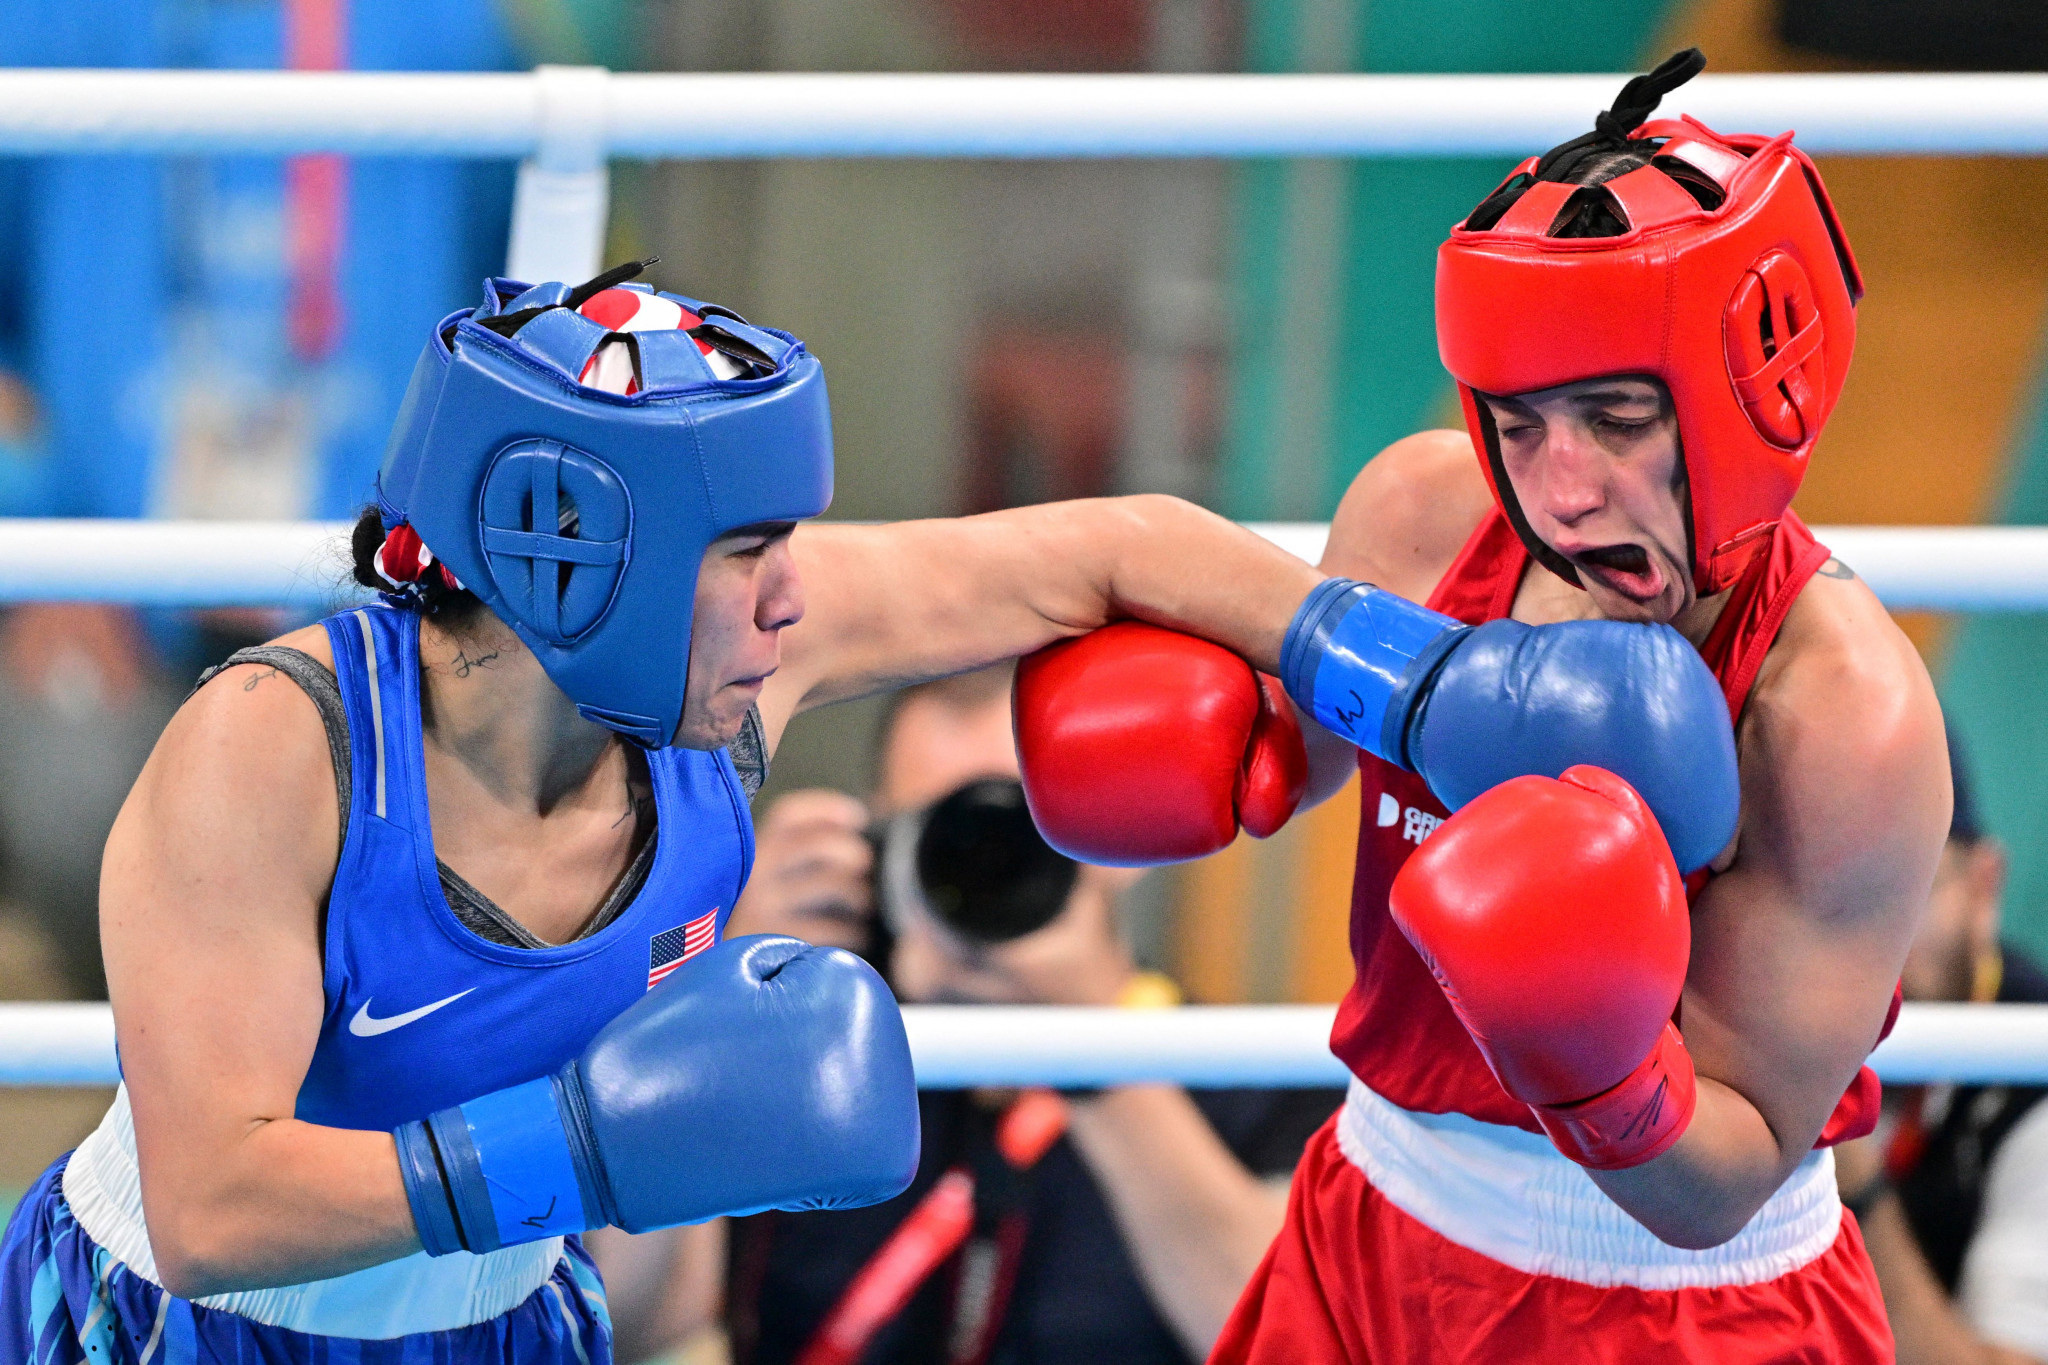 Uruguay's boxer Camila Paola Pineiro Muino takes a blow to the face ©Getty Images